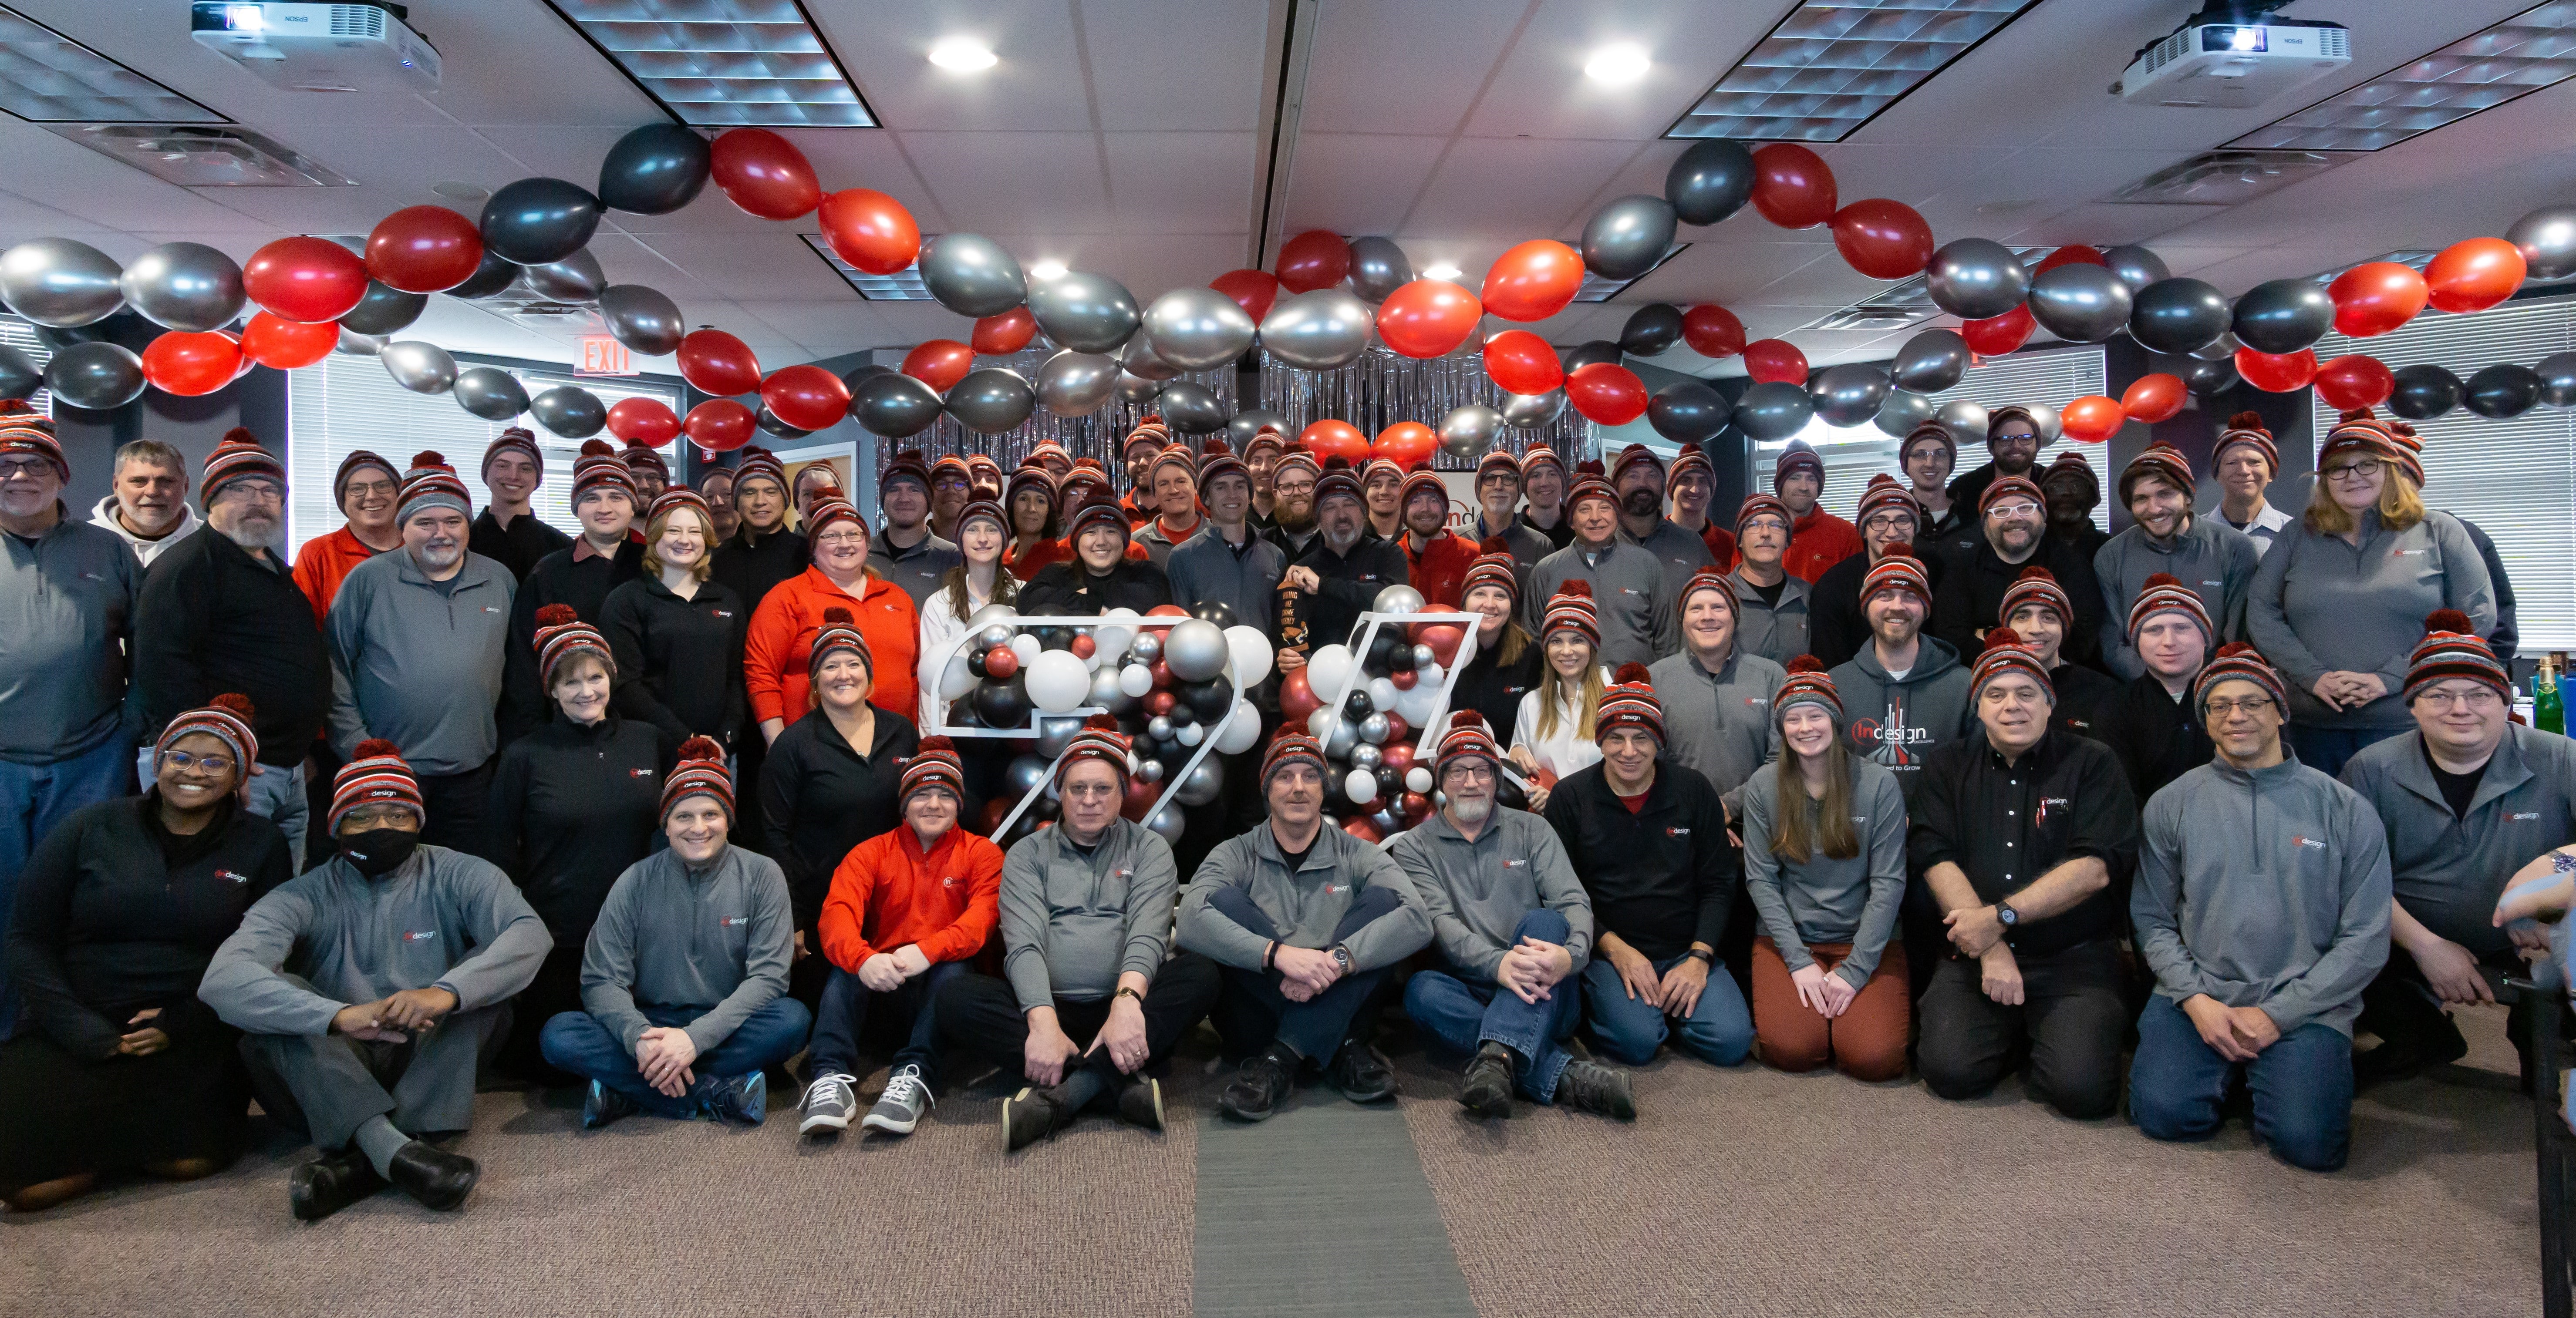 Indesign's 26th Anniversary